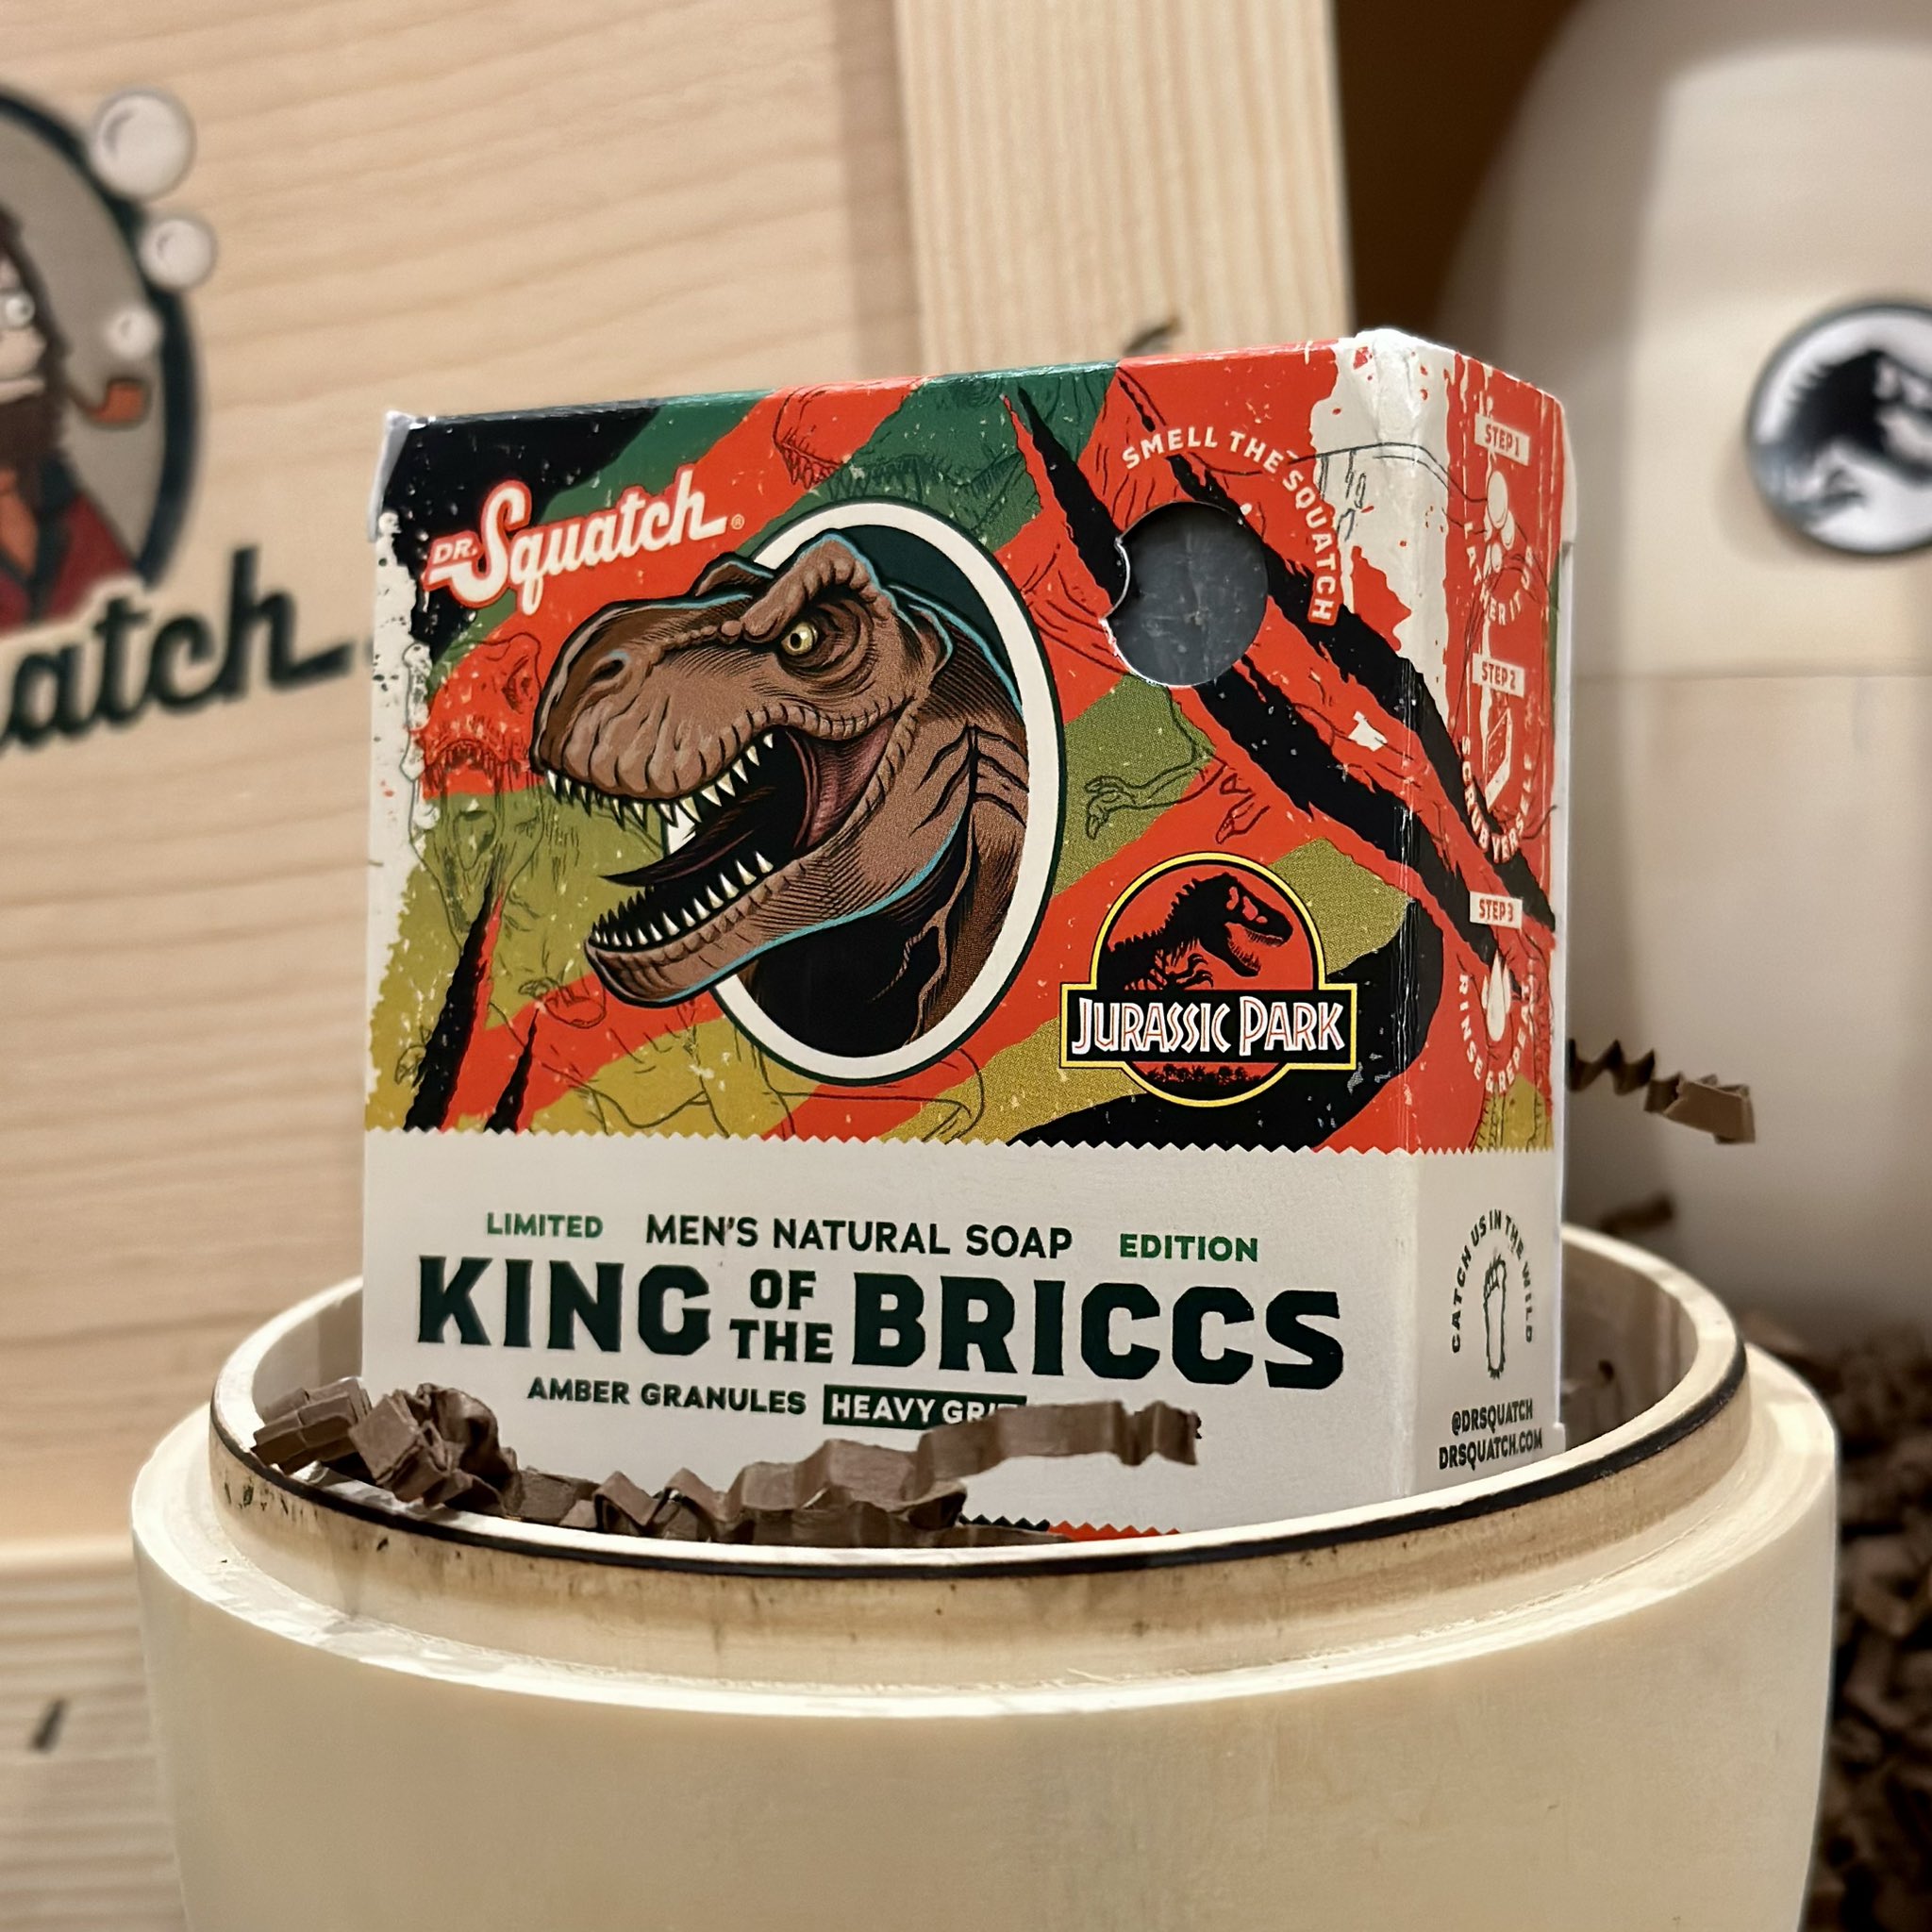 Collect Jurassic on X: WELCOME… TO MY SHOWER! This special delivery from @ drsquatch provided quite an unboxing experience — a real wooden crate  containing a pair of eggs nested inside. And what